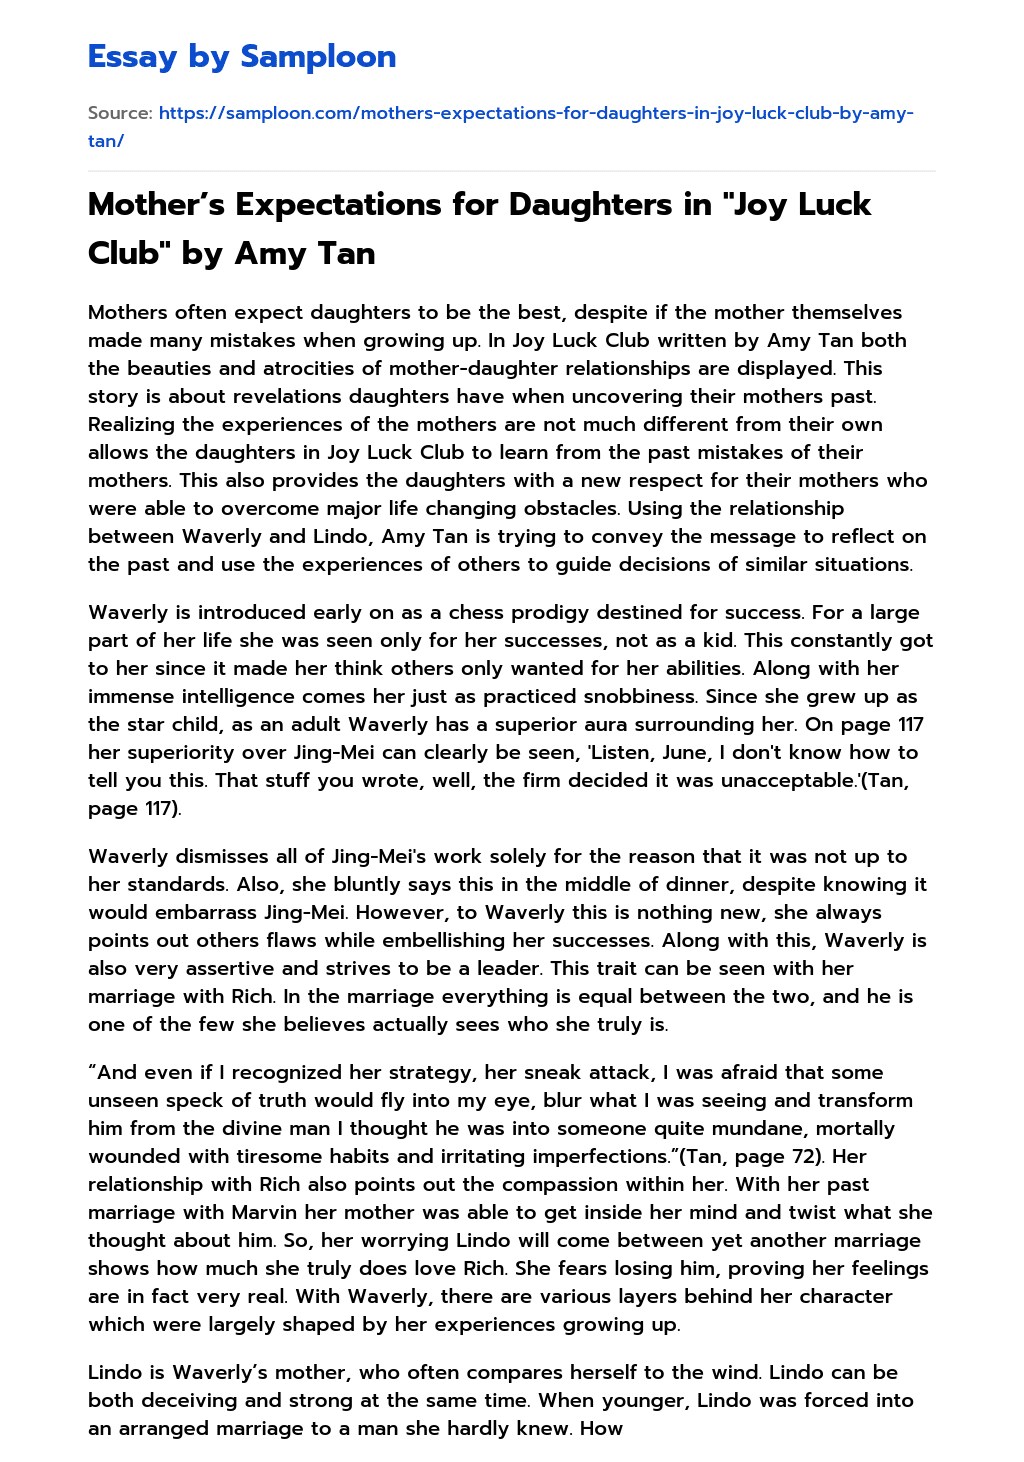 Mother’s Expectations for Daughters in “Joy Luck Club” by Amy Tan essay